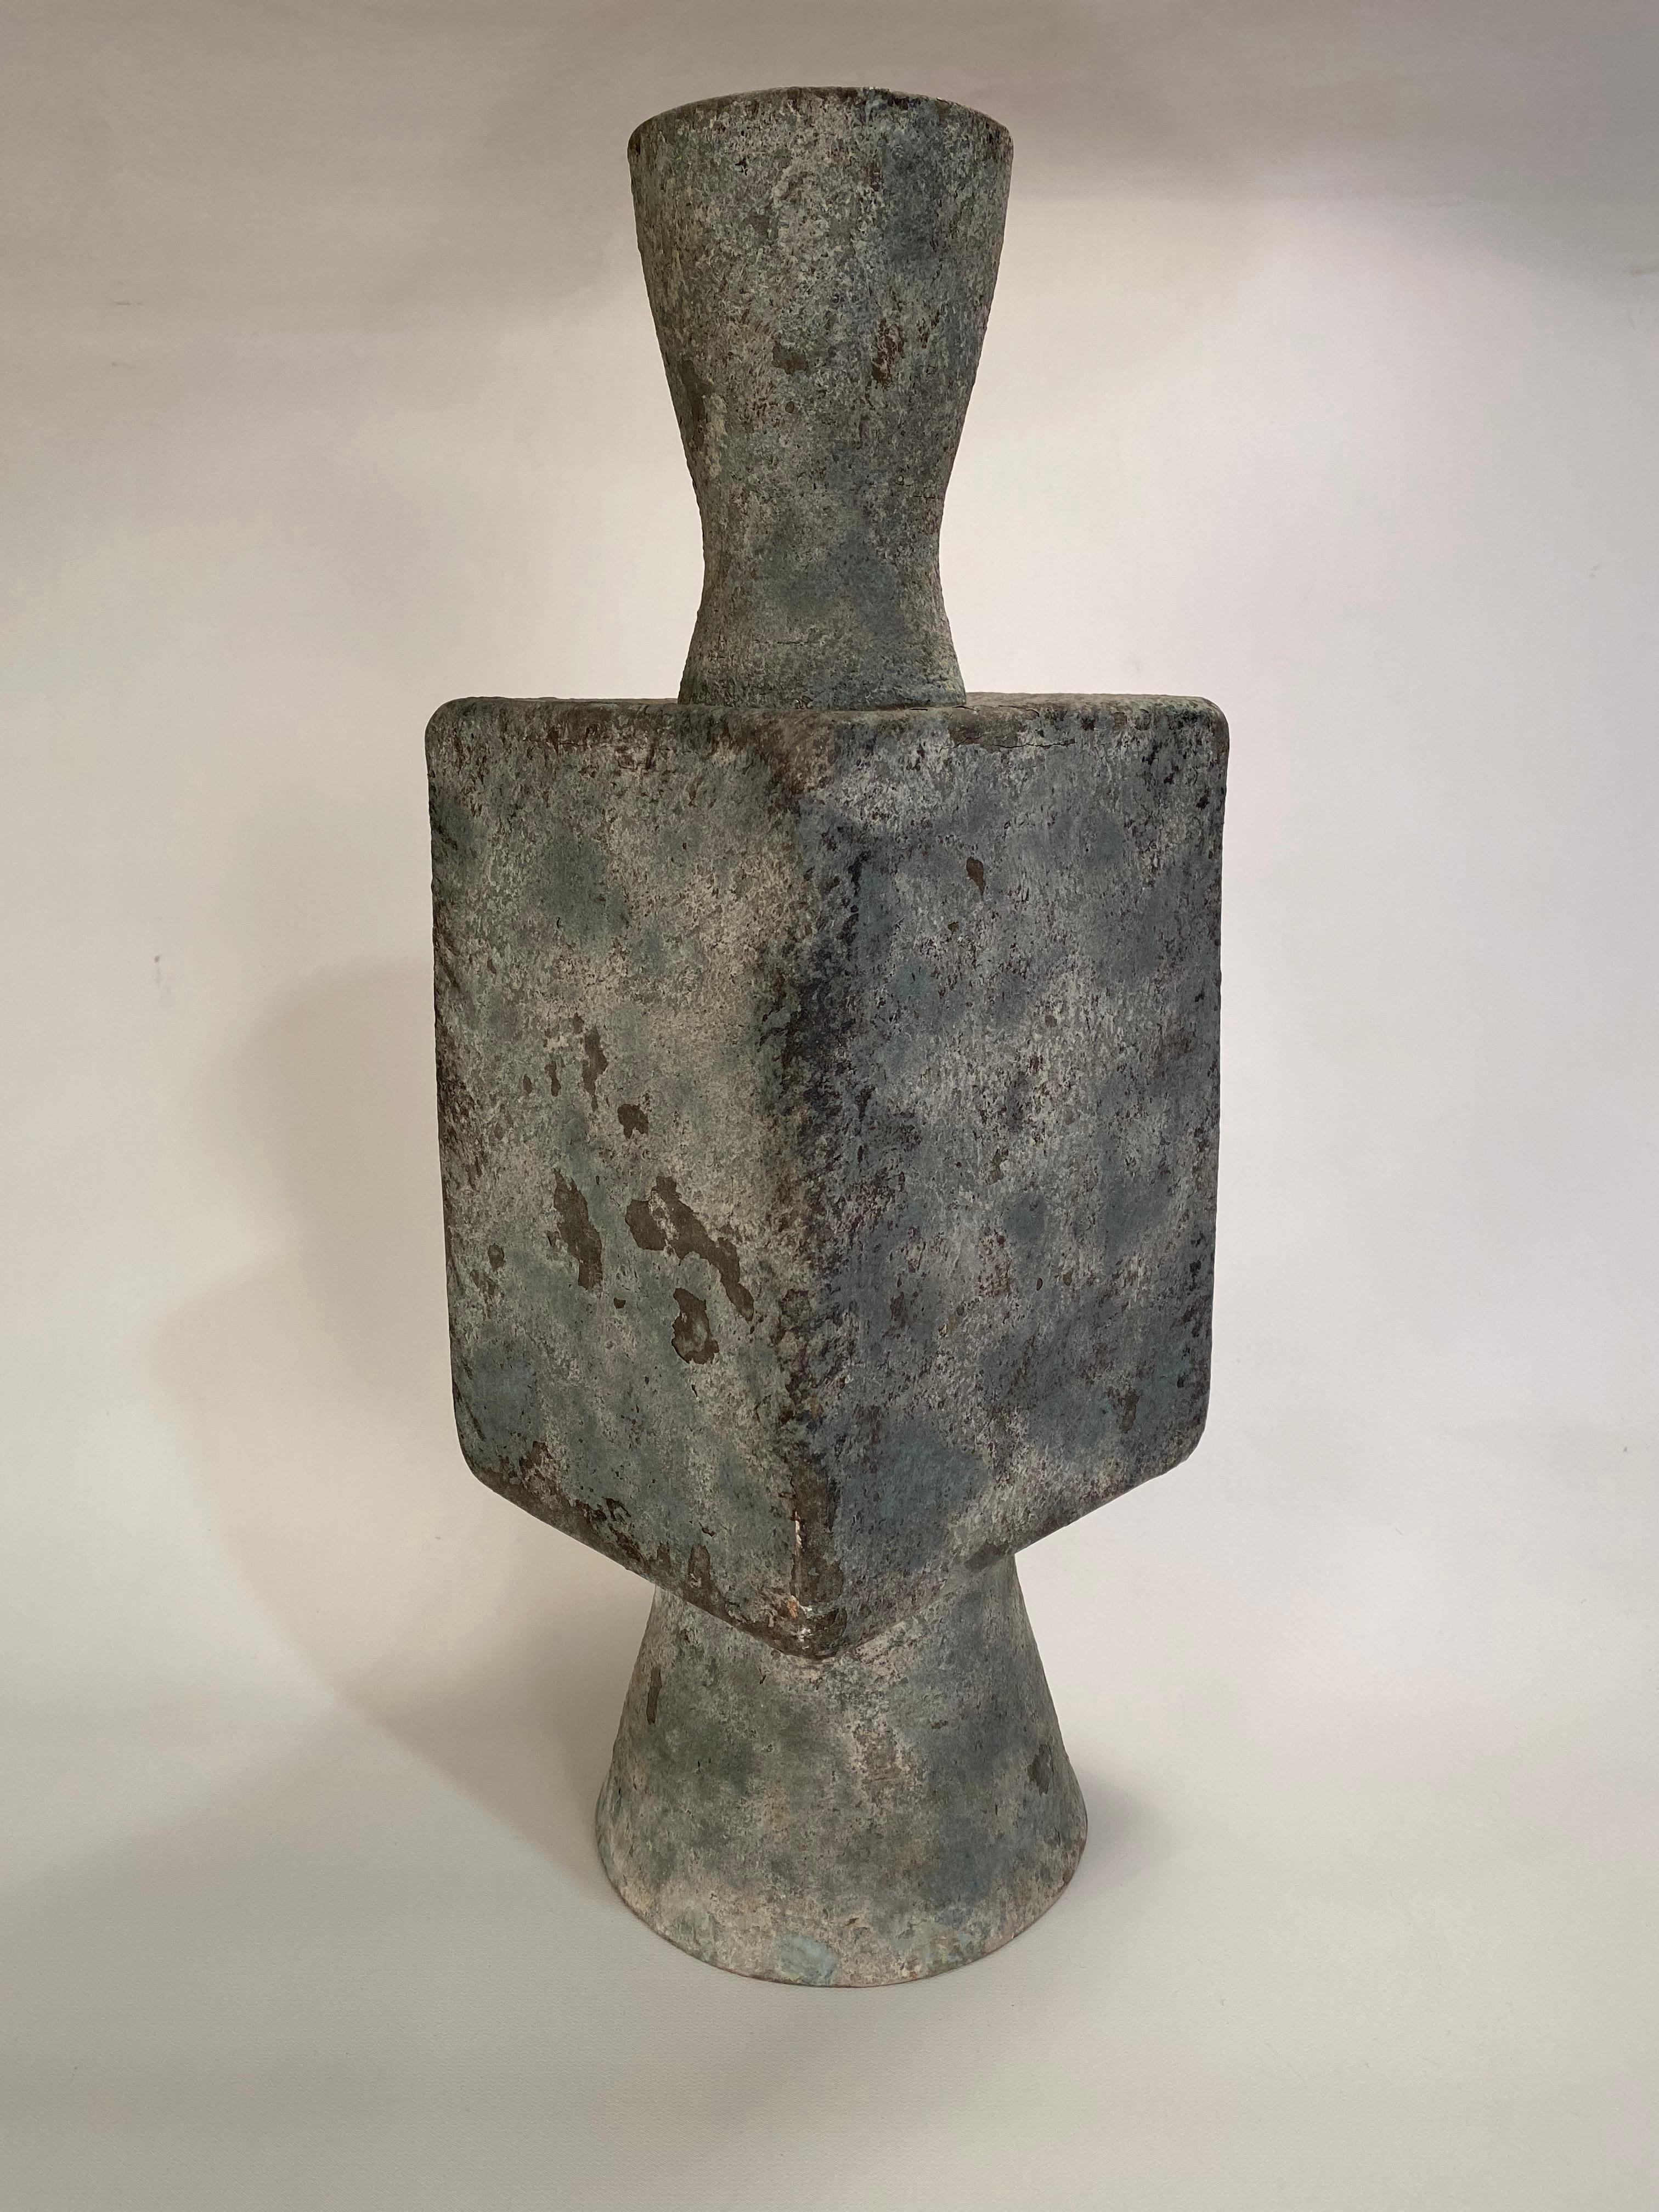 Large slab built architectural pottery vase. Purchased from a White Plains, NY estate that had multiple pieces by this particular artist. Little biographical information was available other than the family was close personal friends with the potter.